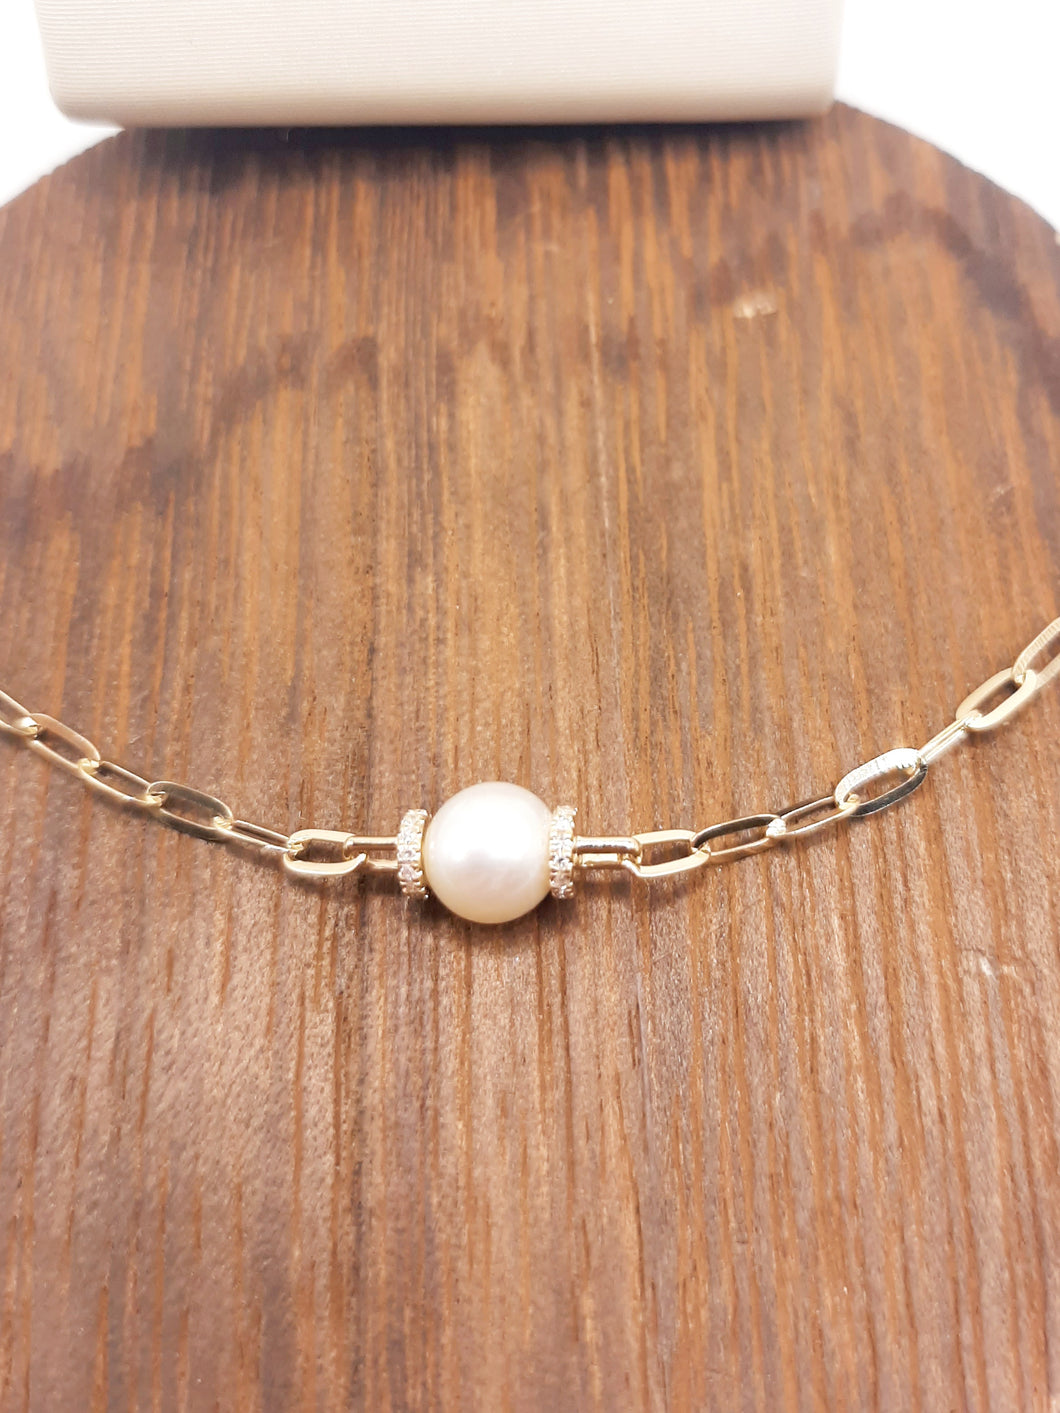 14kt yellow gold paperclip bracelet featuring a pearl and diamonds 7.5